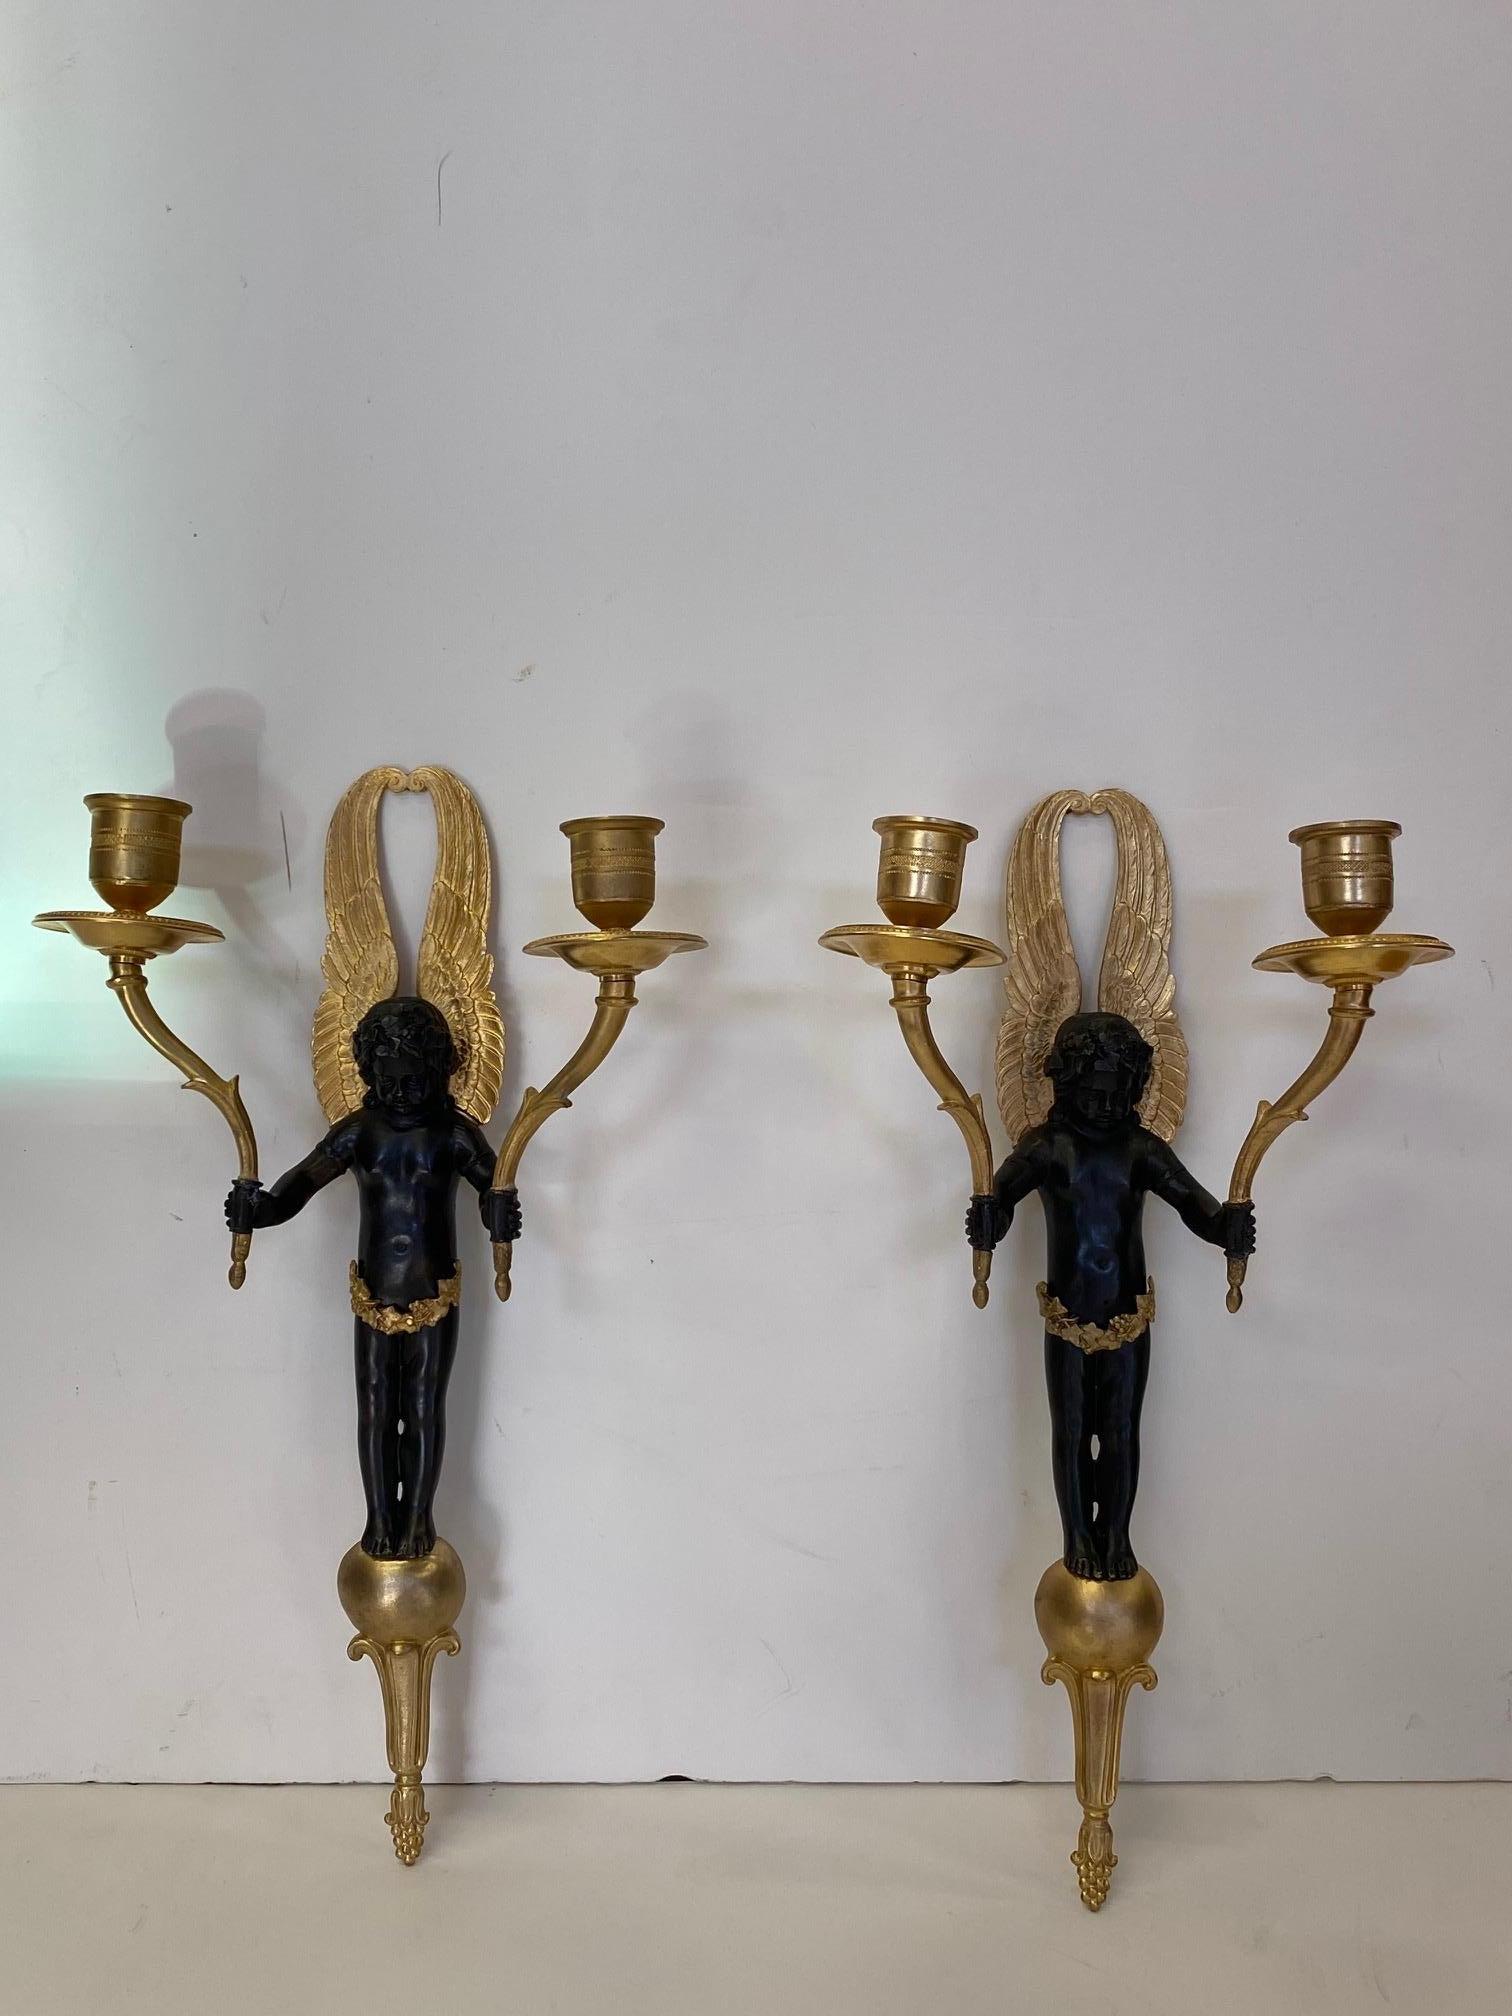 Early 20th Century Fancy Pair of French Gilt and Patinated Bronze Wall Sconces with Putti